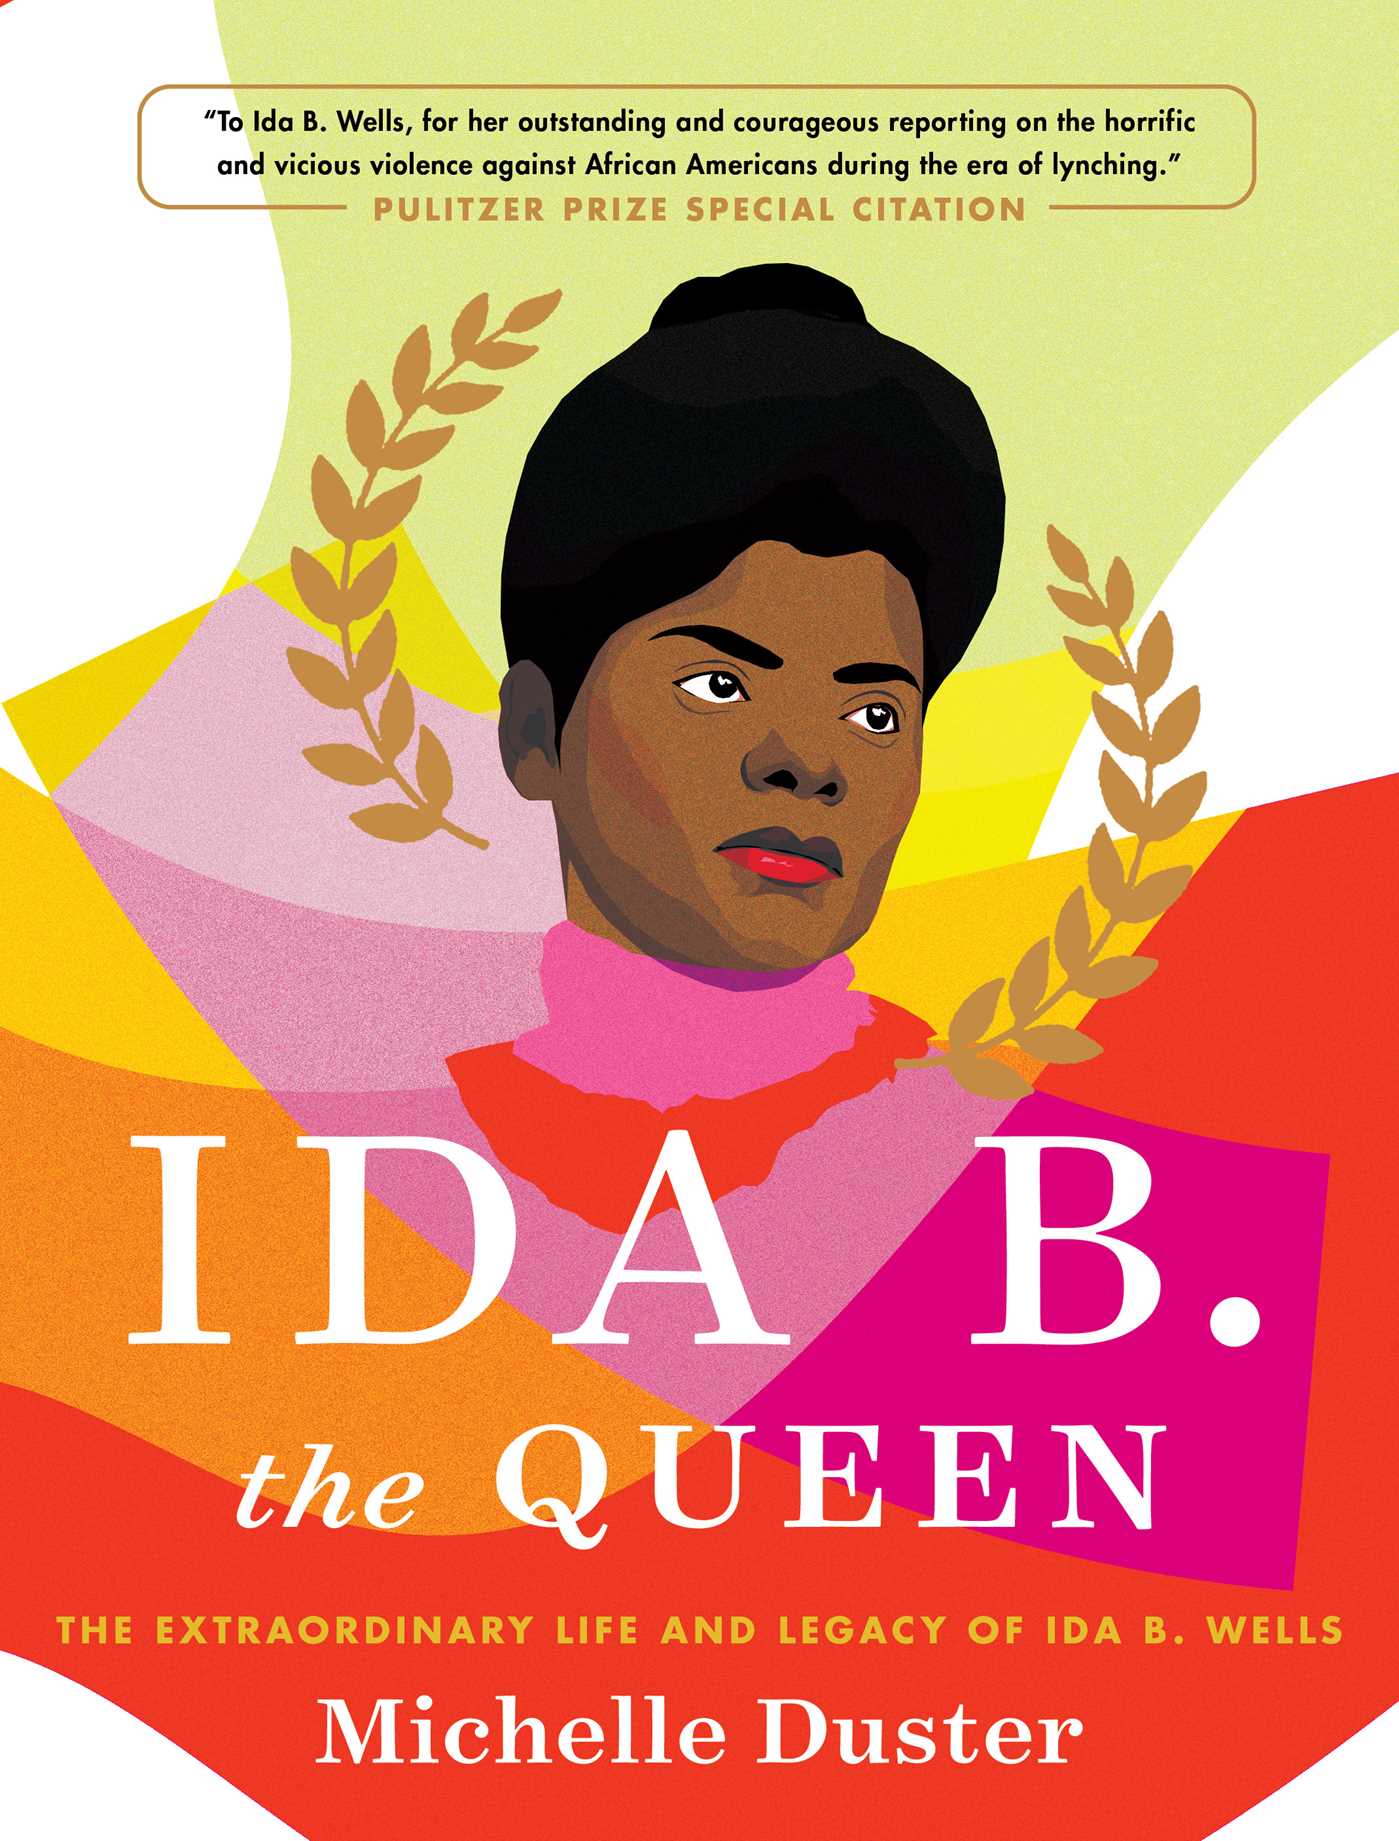 Image for "Ida B. the Queen"